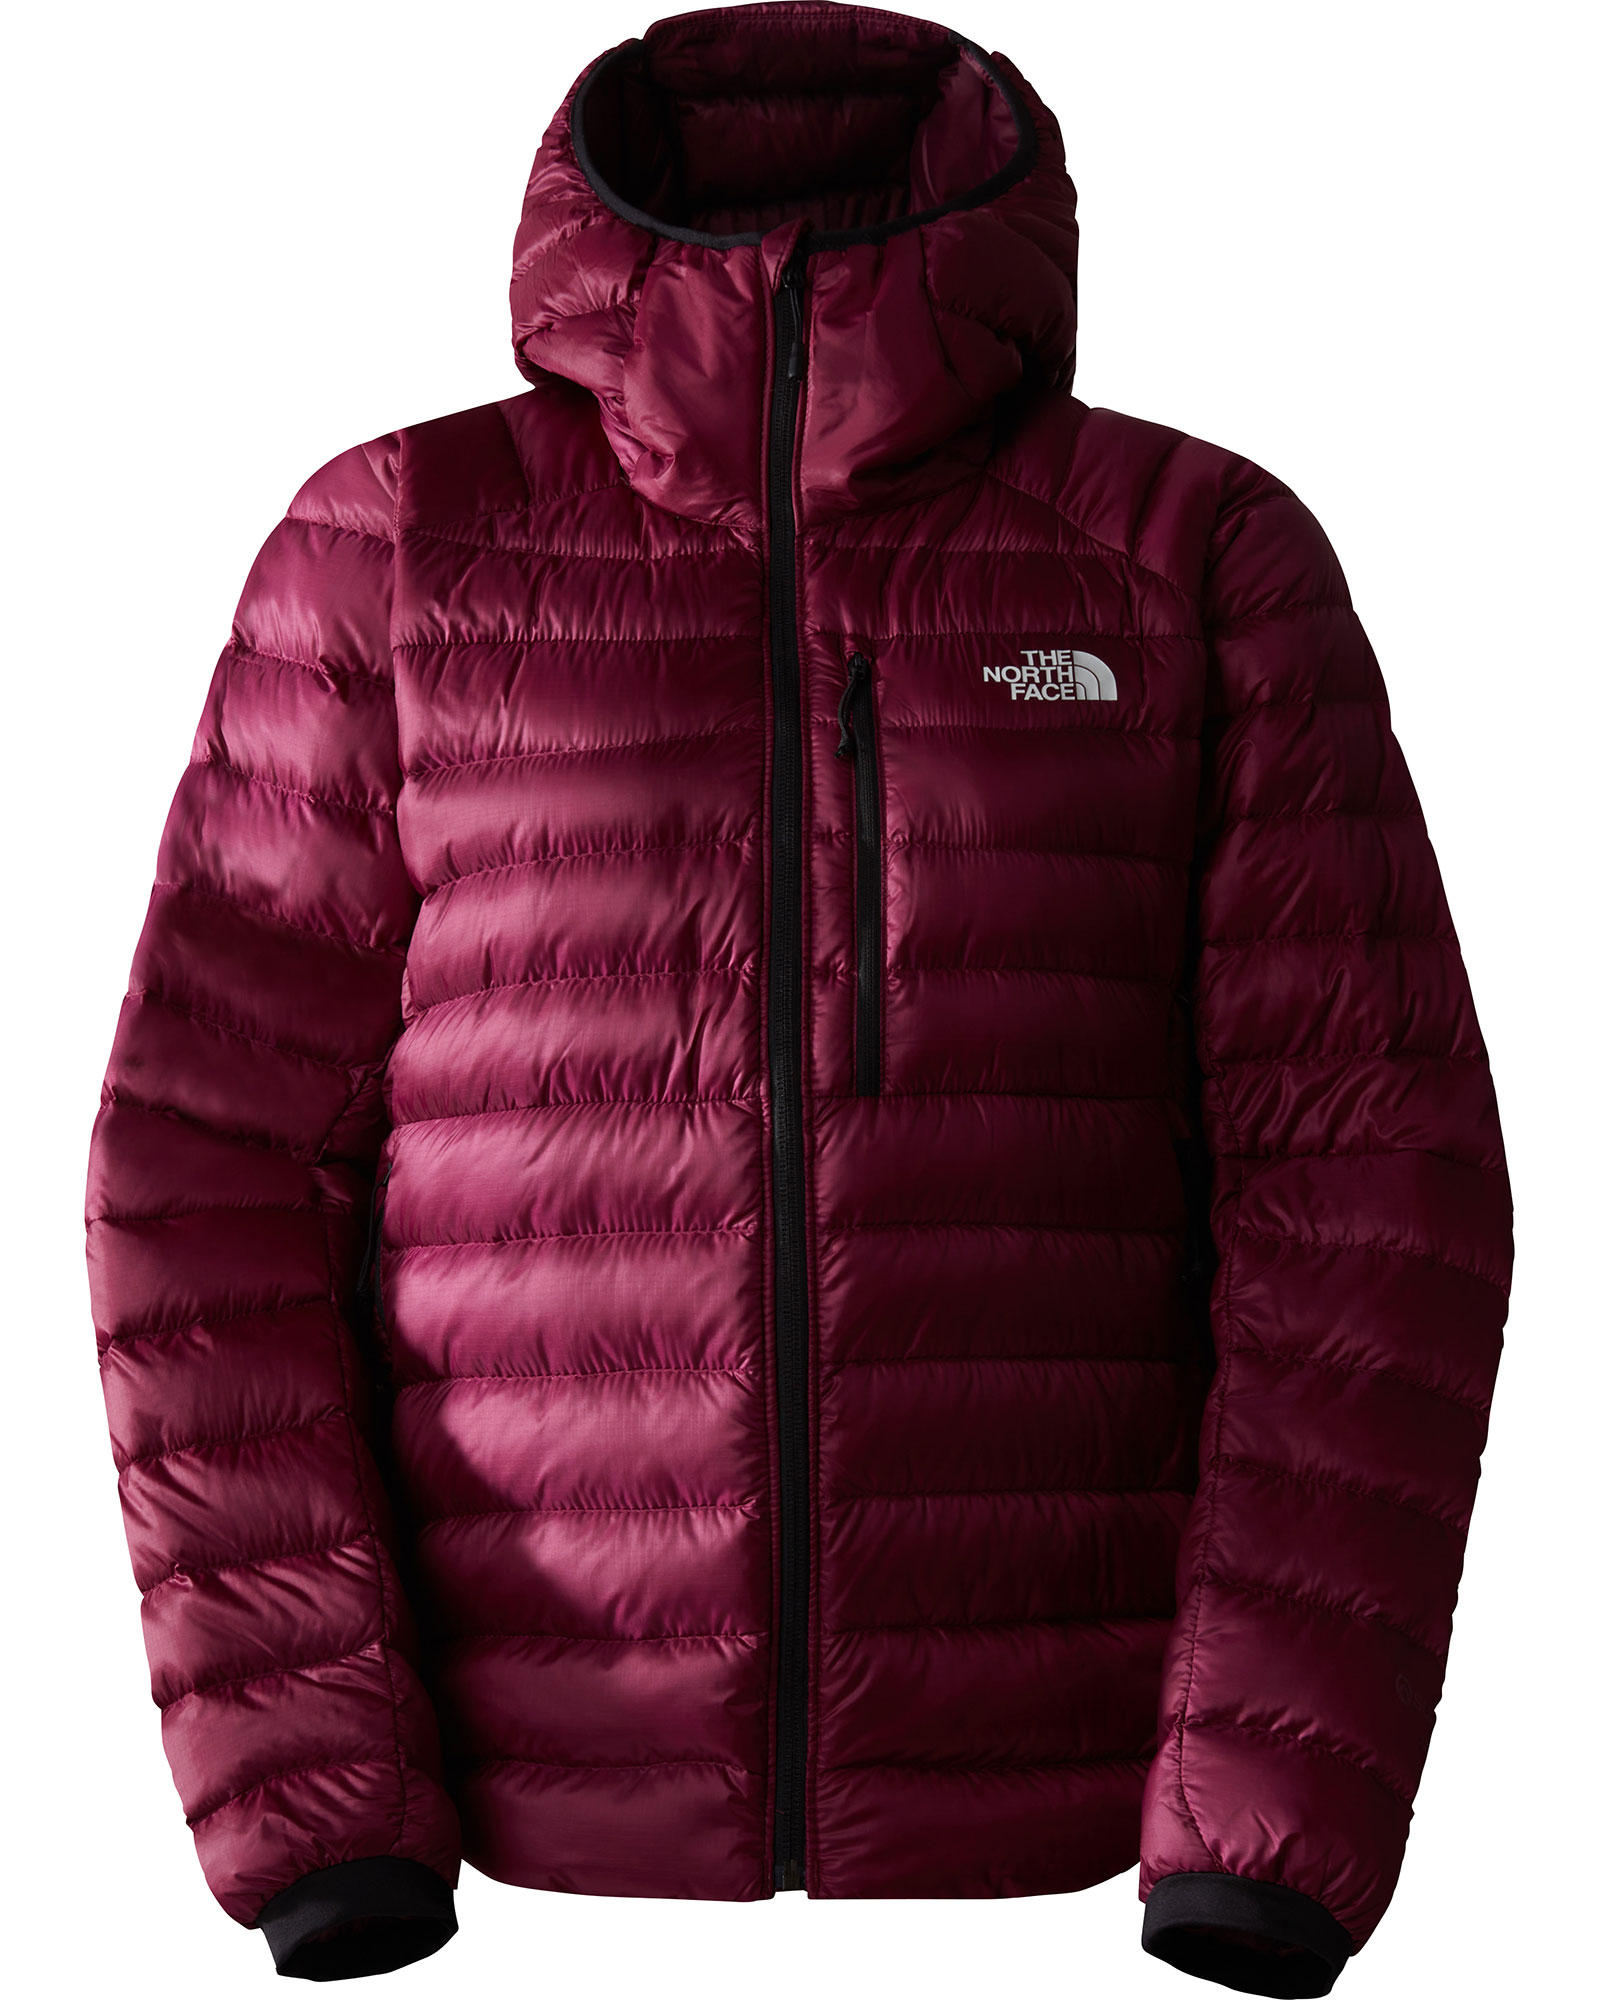 The North Face Summit Breithorn Women’s Down Hoodie - Boysenberry XS